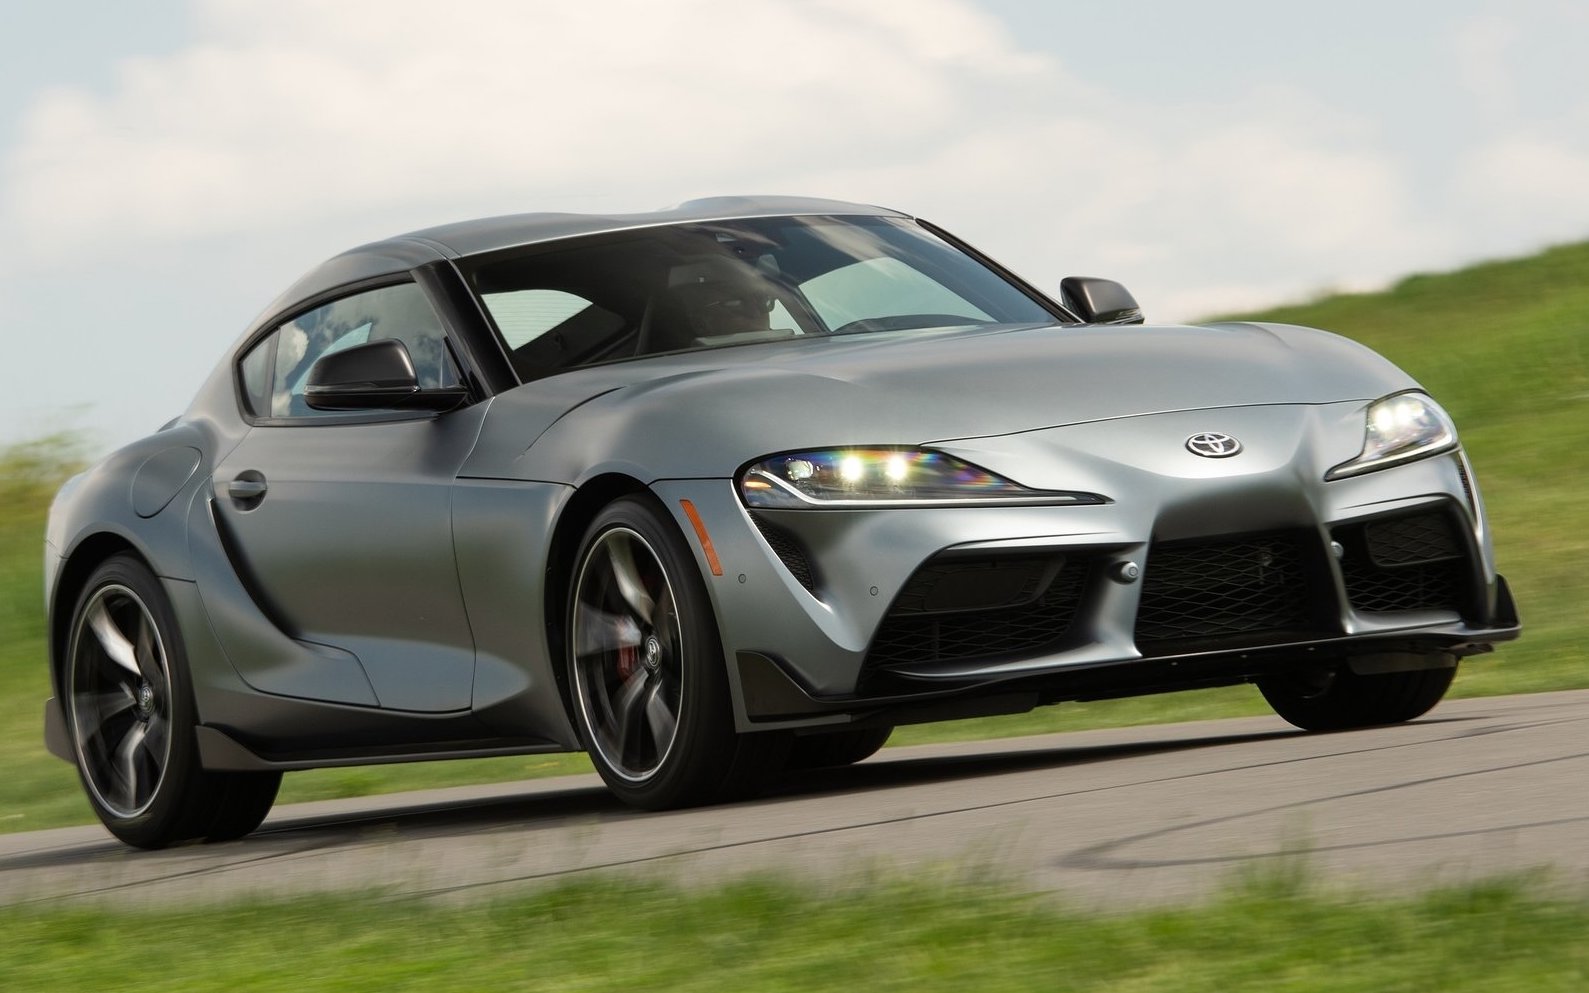 Toyota GR Supra getting power boost to 285kW, arrives late-2020